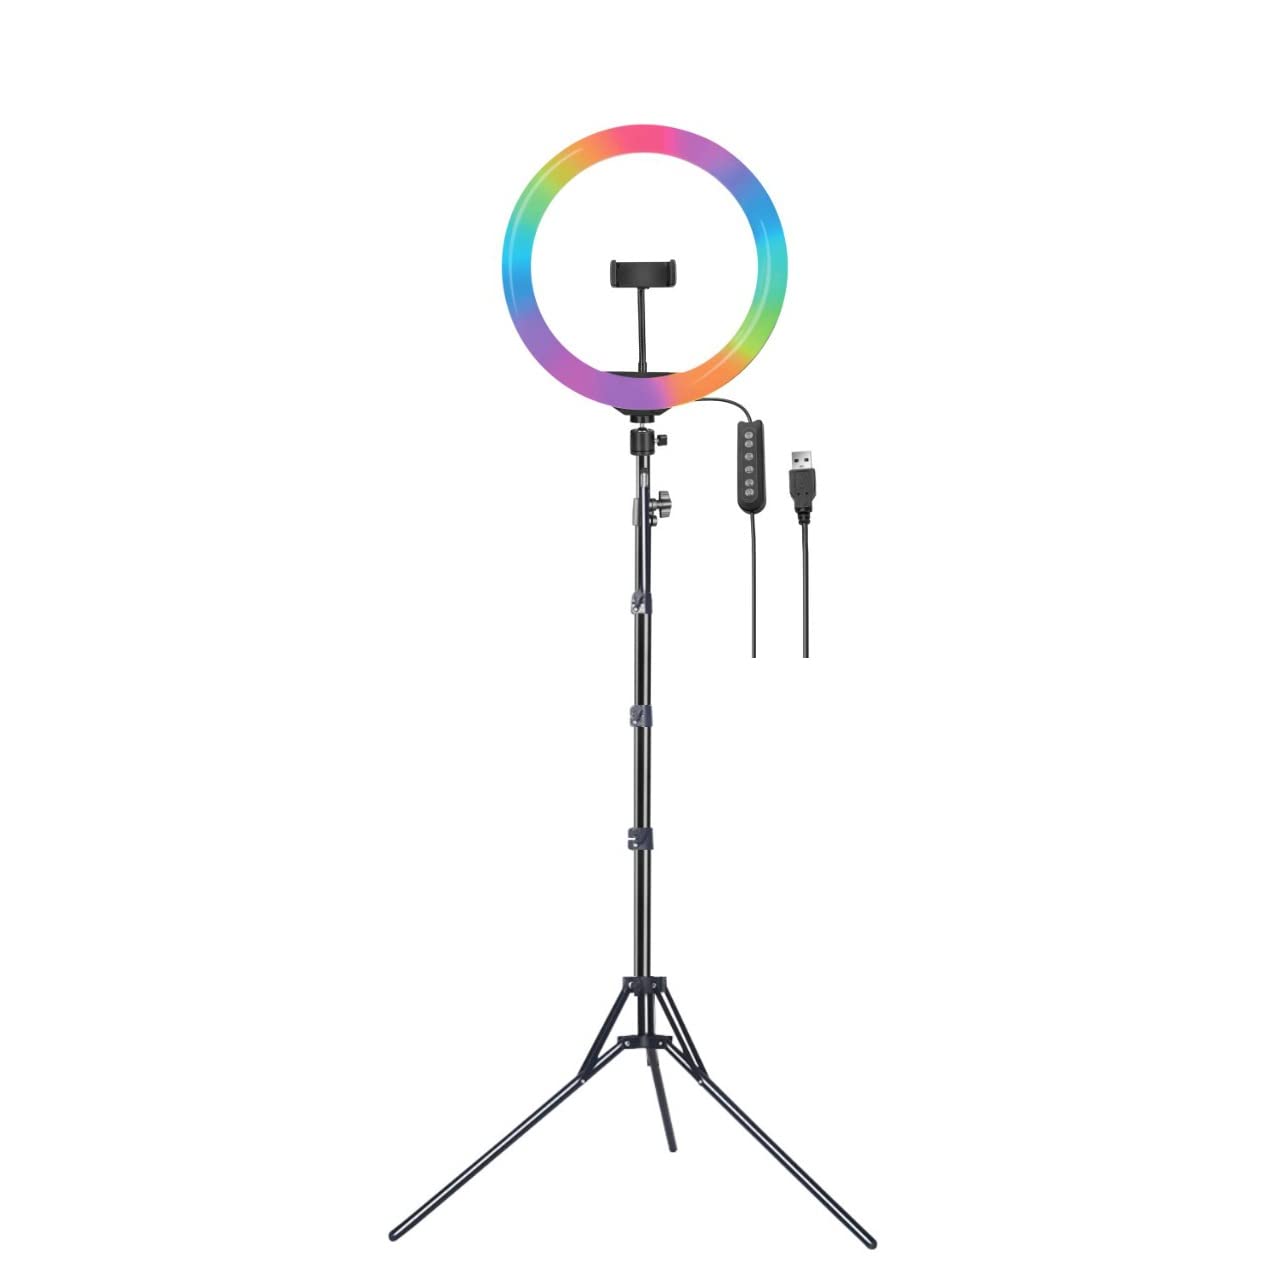 Buy Generic Selfie Ring Light, LED Camera Ring Light with 3 Light Modes &  11 Brightness Level for YouTube Video/Live Stream/Makeup (A) Online at Low  Prices in India - Amazon.in